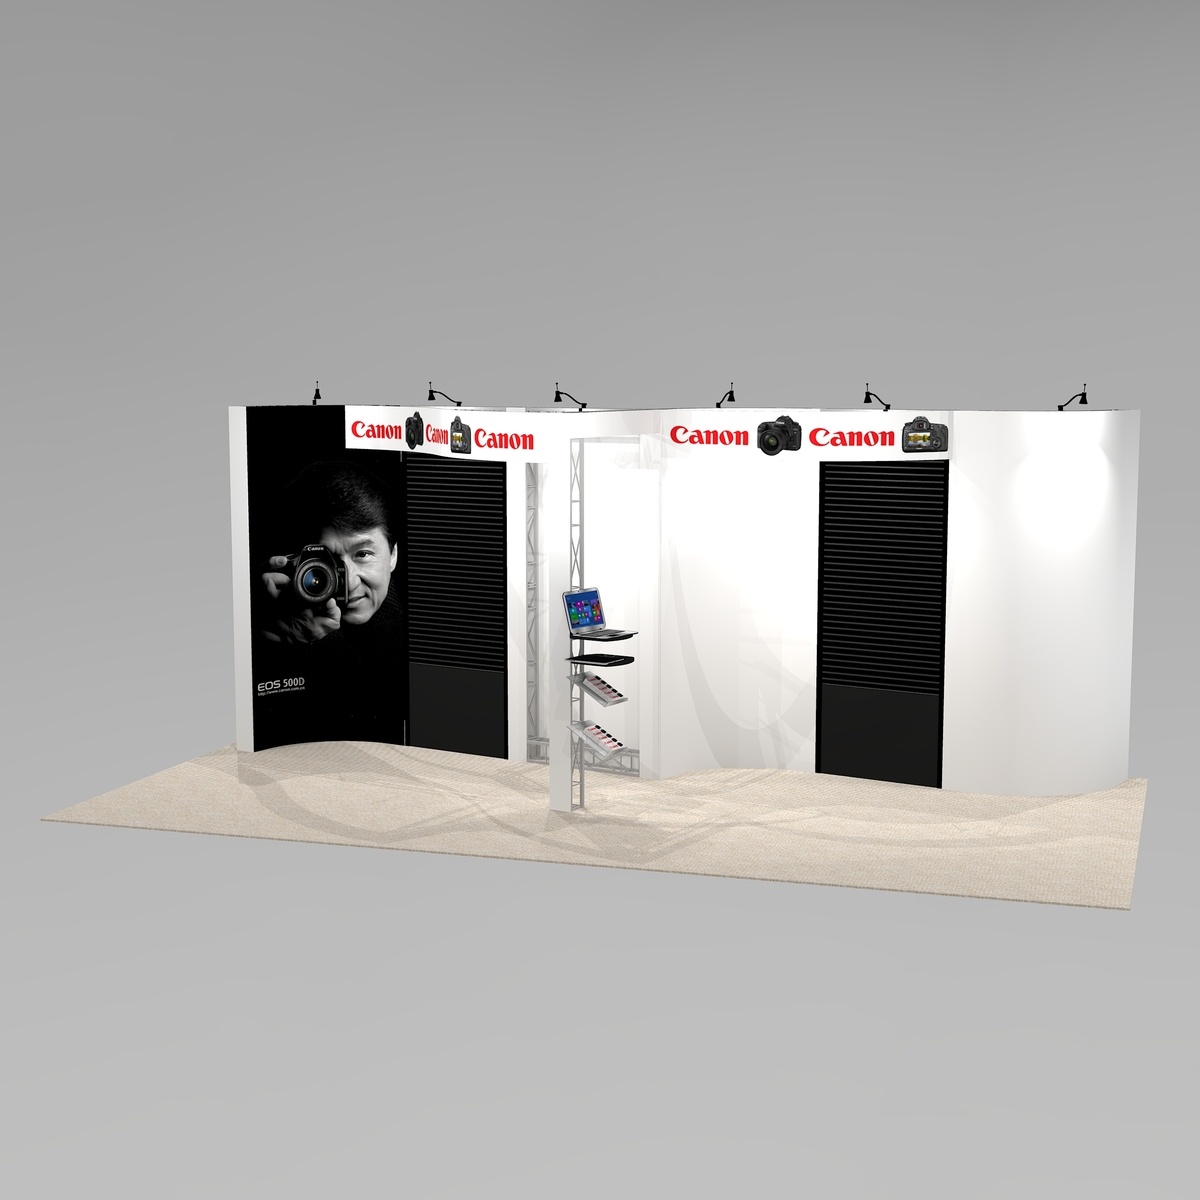 Curved slat wall trade show exhibit design NAP1020 Graphic Package A